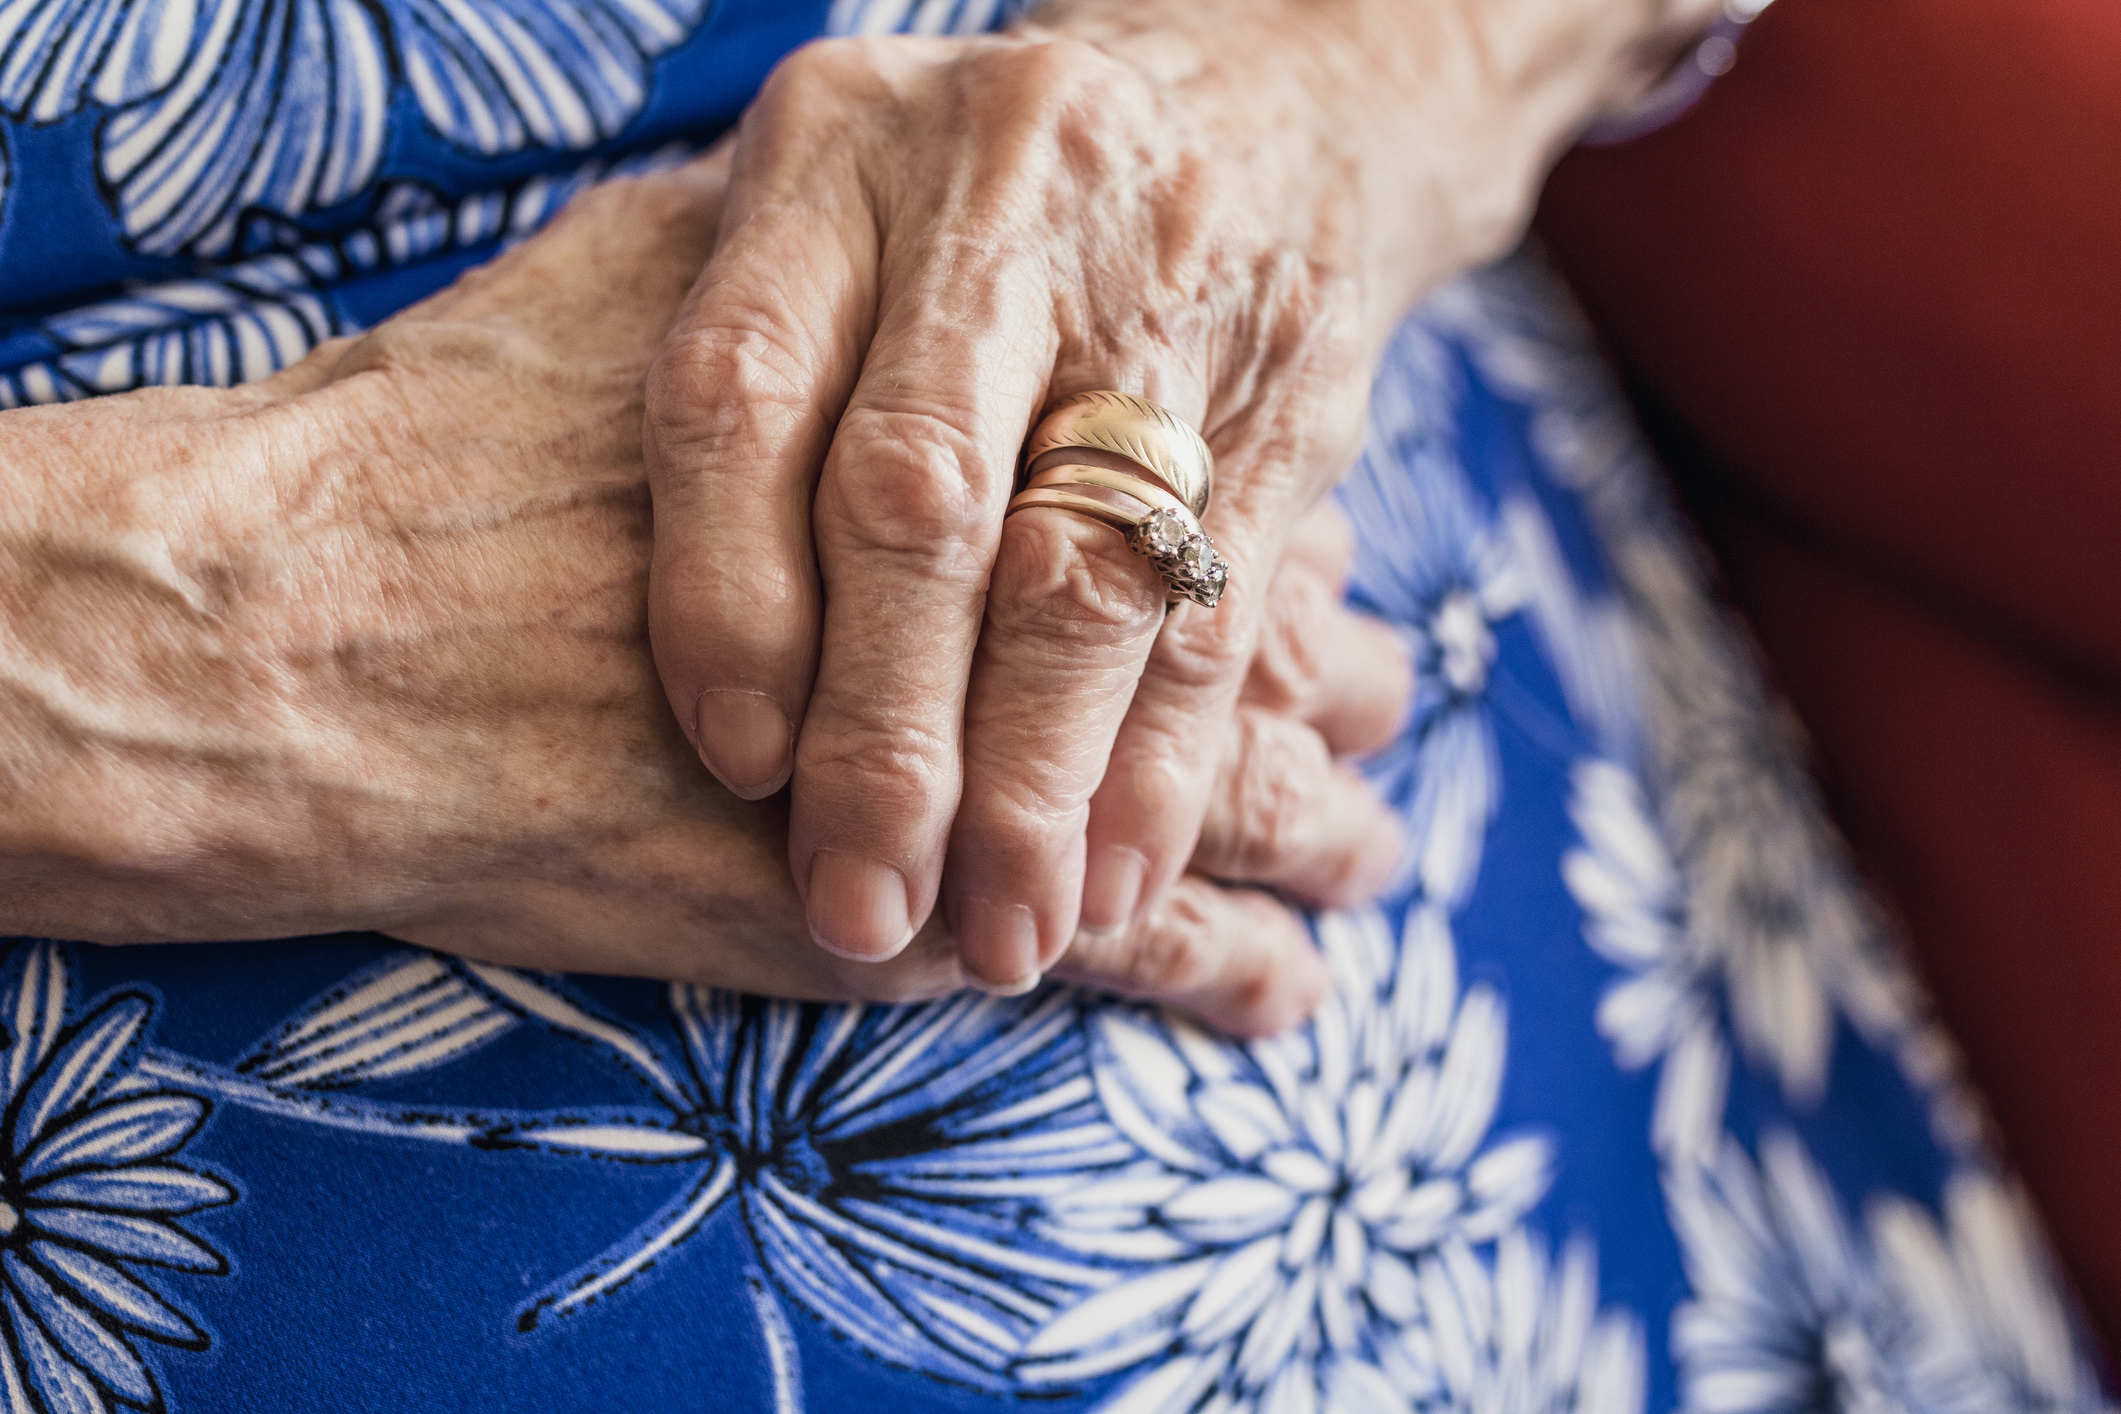 Elderly person&#x27;s hands with wedding rings resting on a floral patterned garment